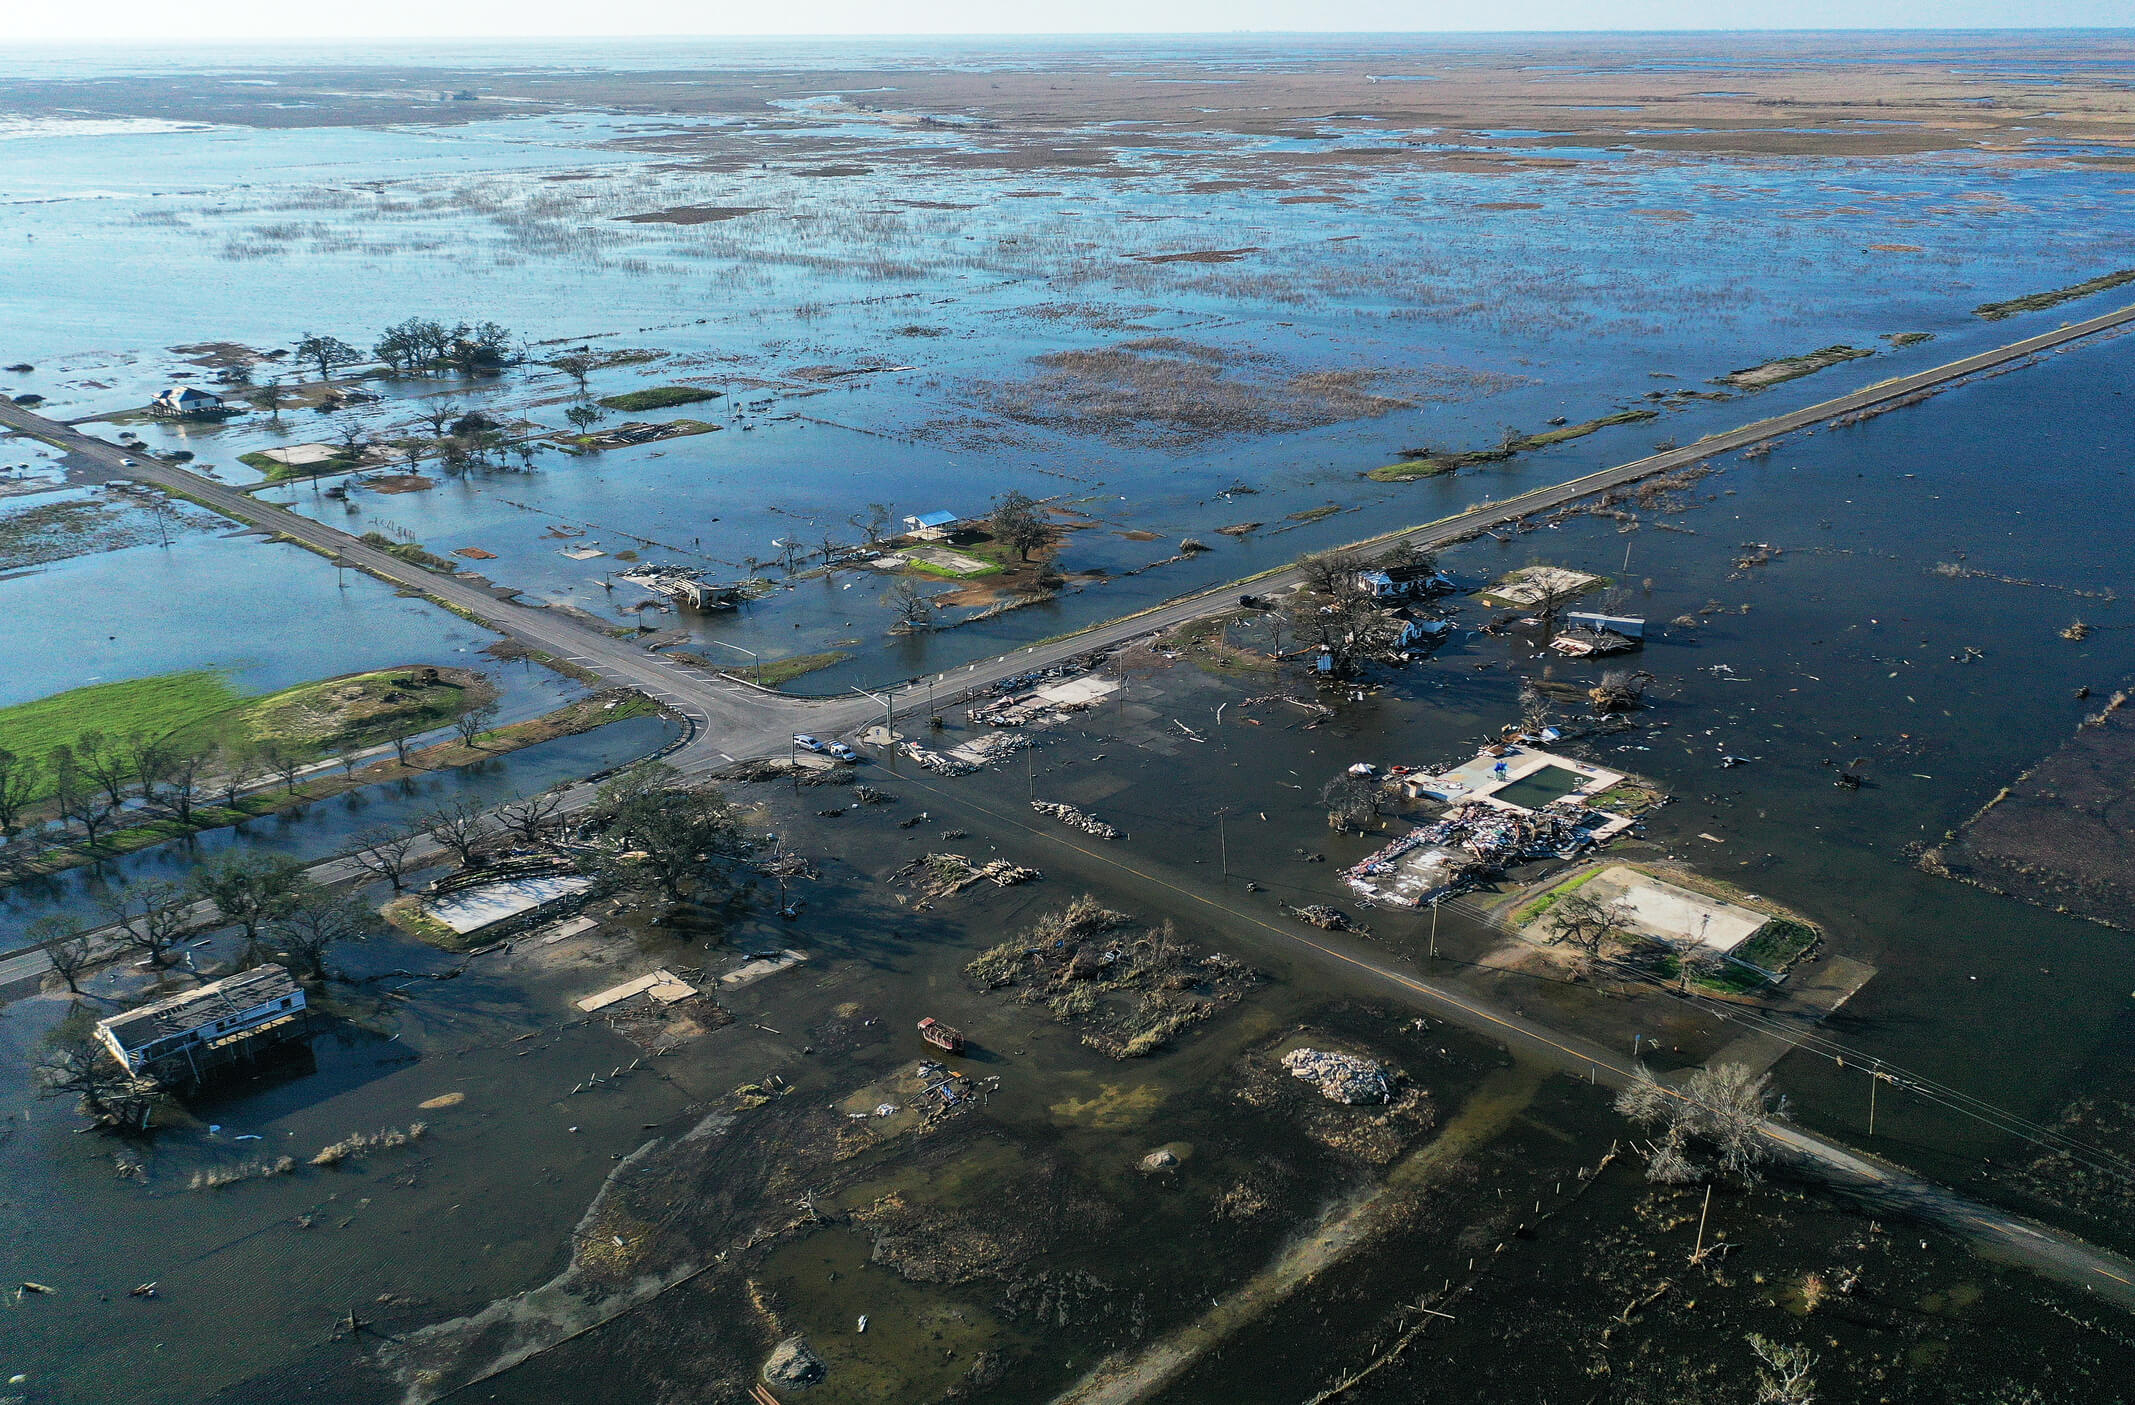 Coastal infrastructure damage caused by a hurricane